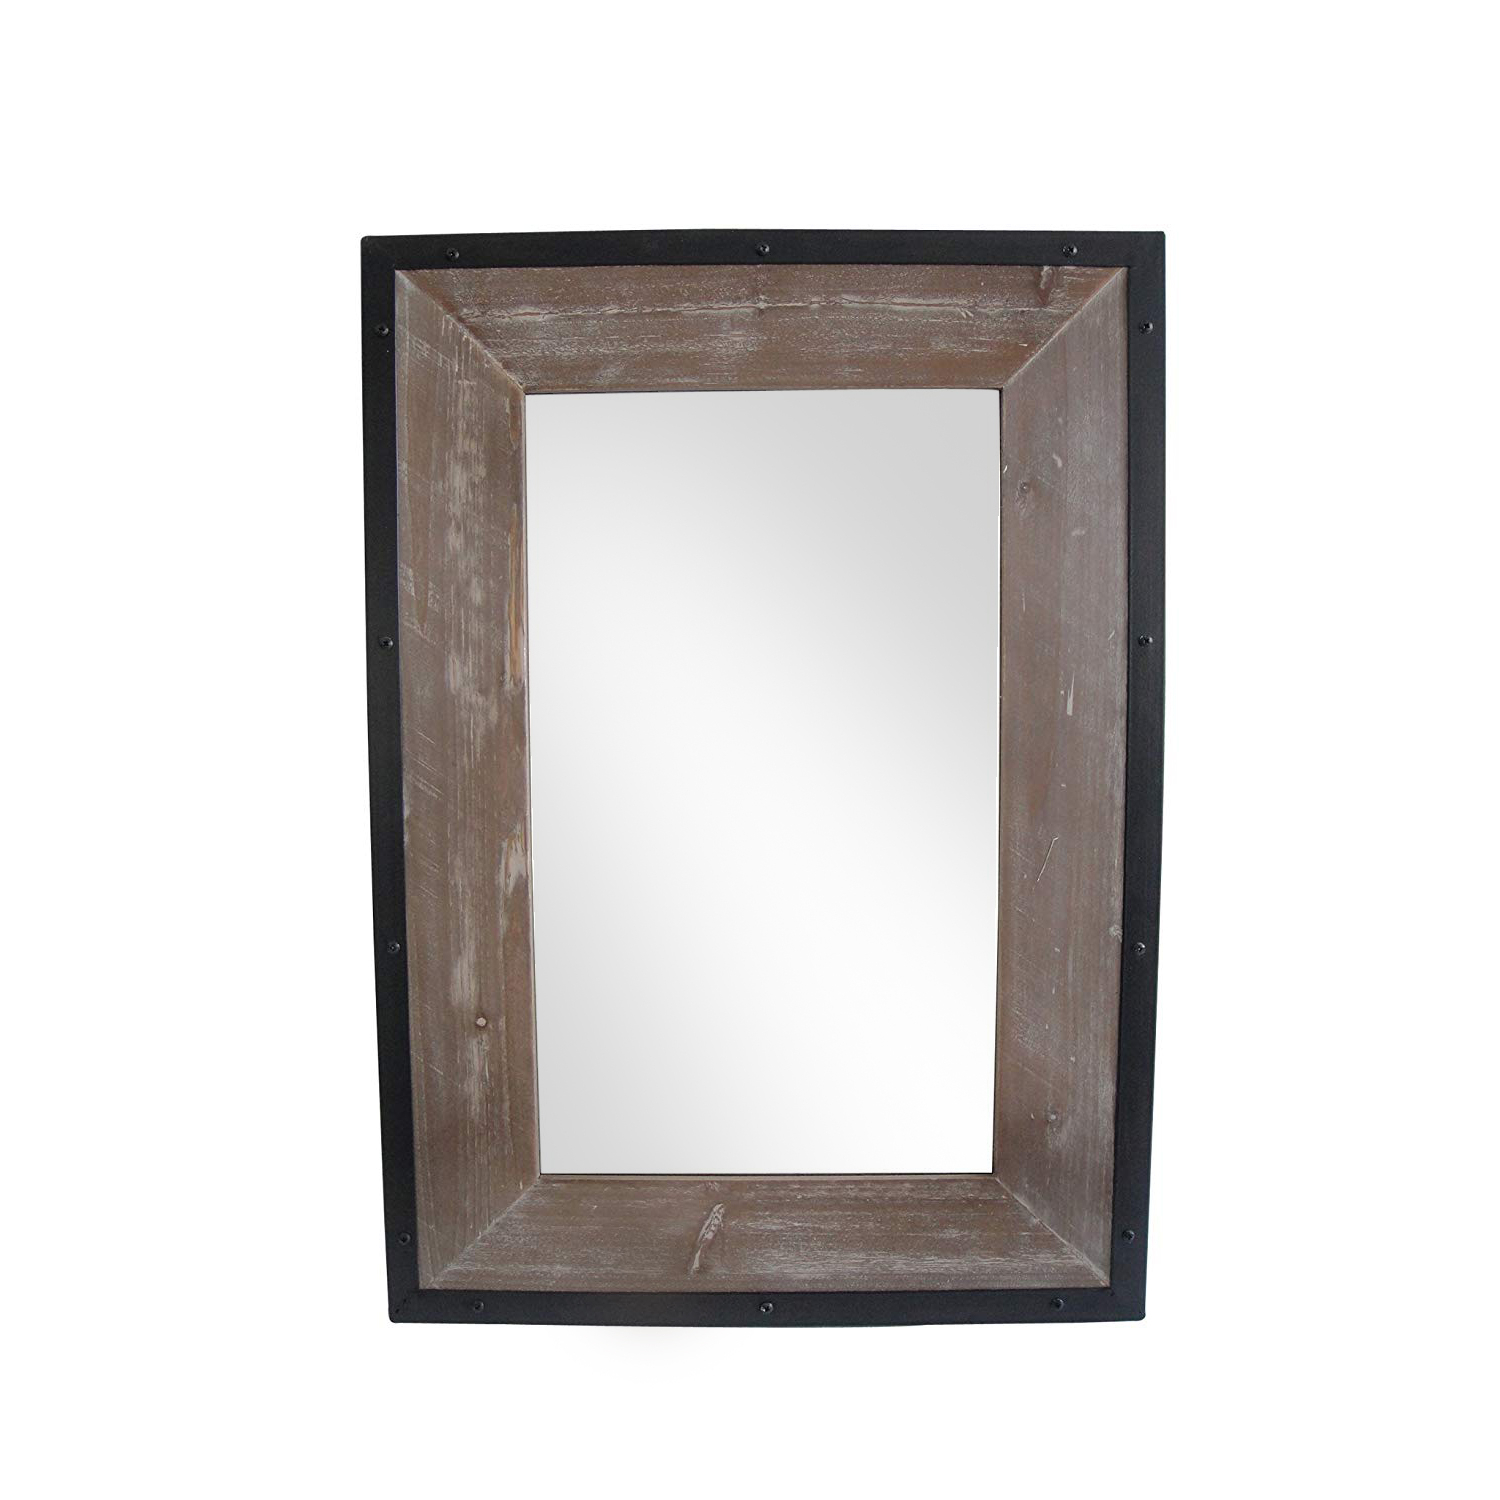 Transitional Mirror With Wooden Framing And Metal Outline, Black & Brown- Saltoro Sherpi